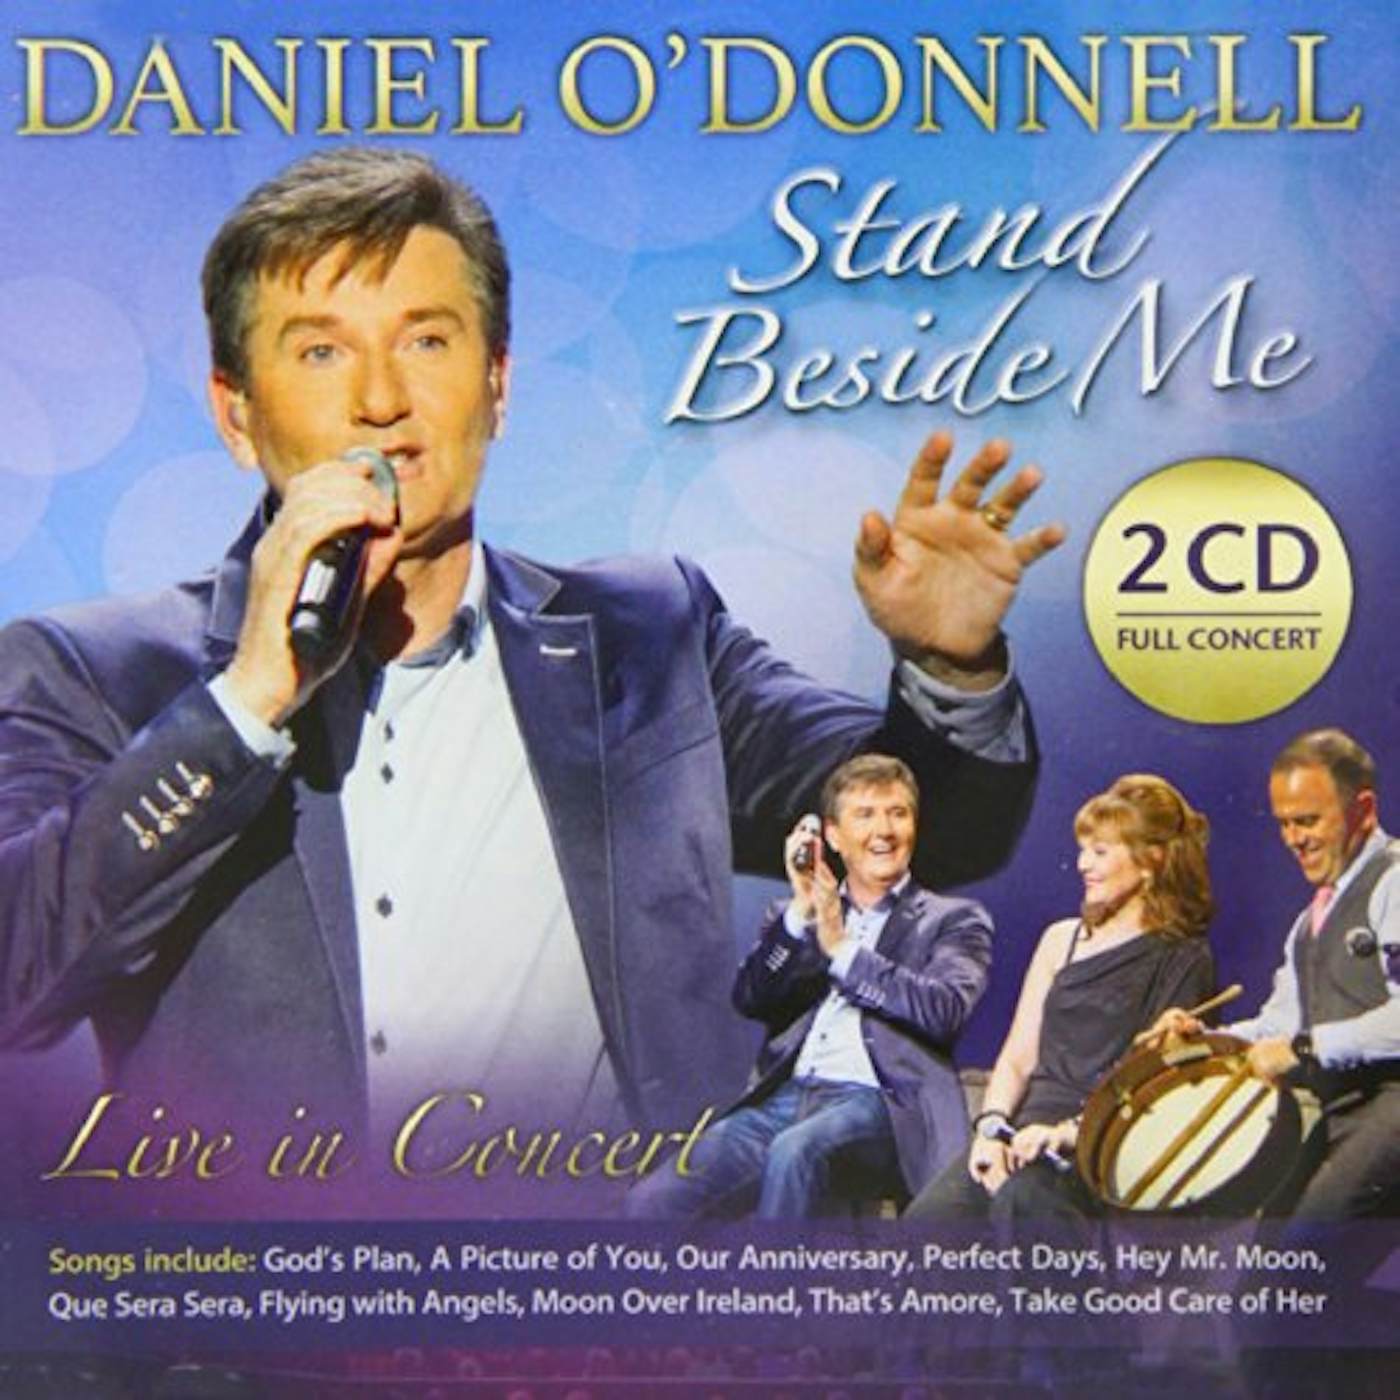 Daniel O'Donnell STAND BESIDE ME: LIVE IN CONCERT CD